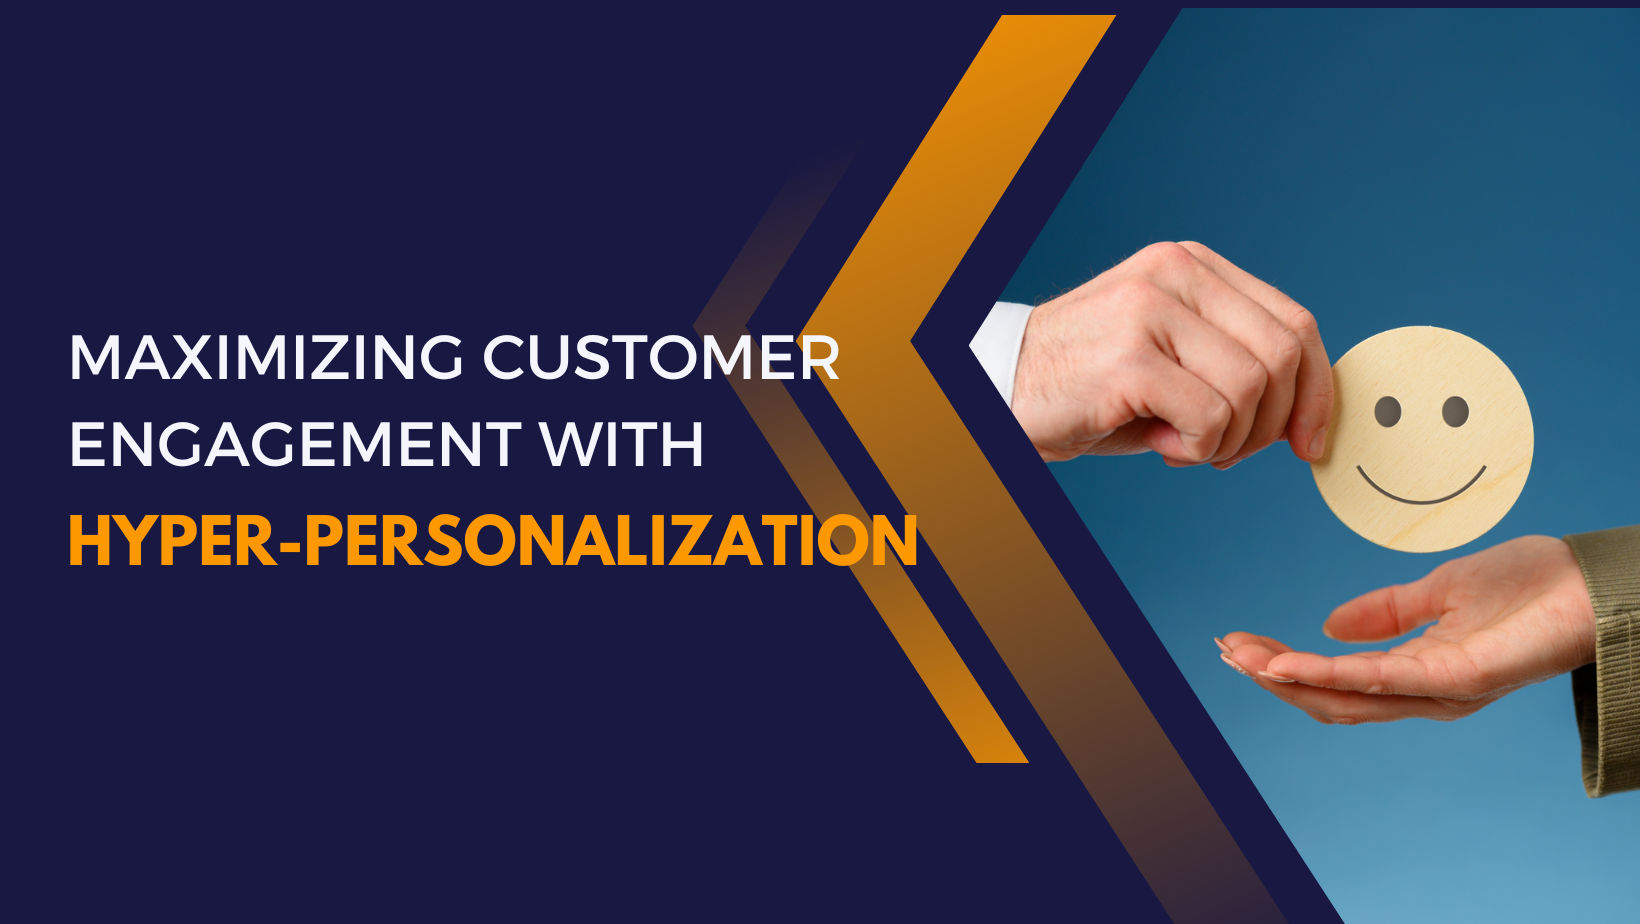 Maximizing Customer Engagement with Hyper-Personalization Techniques